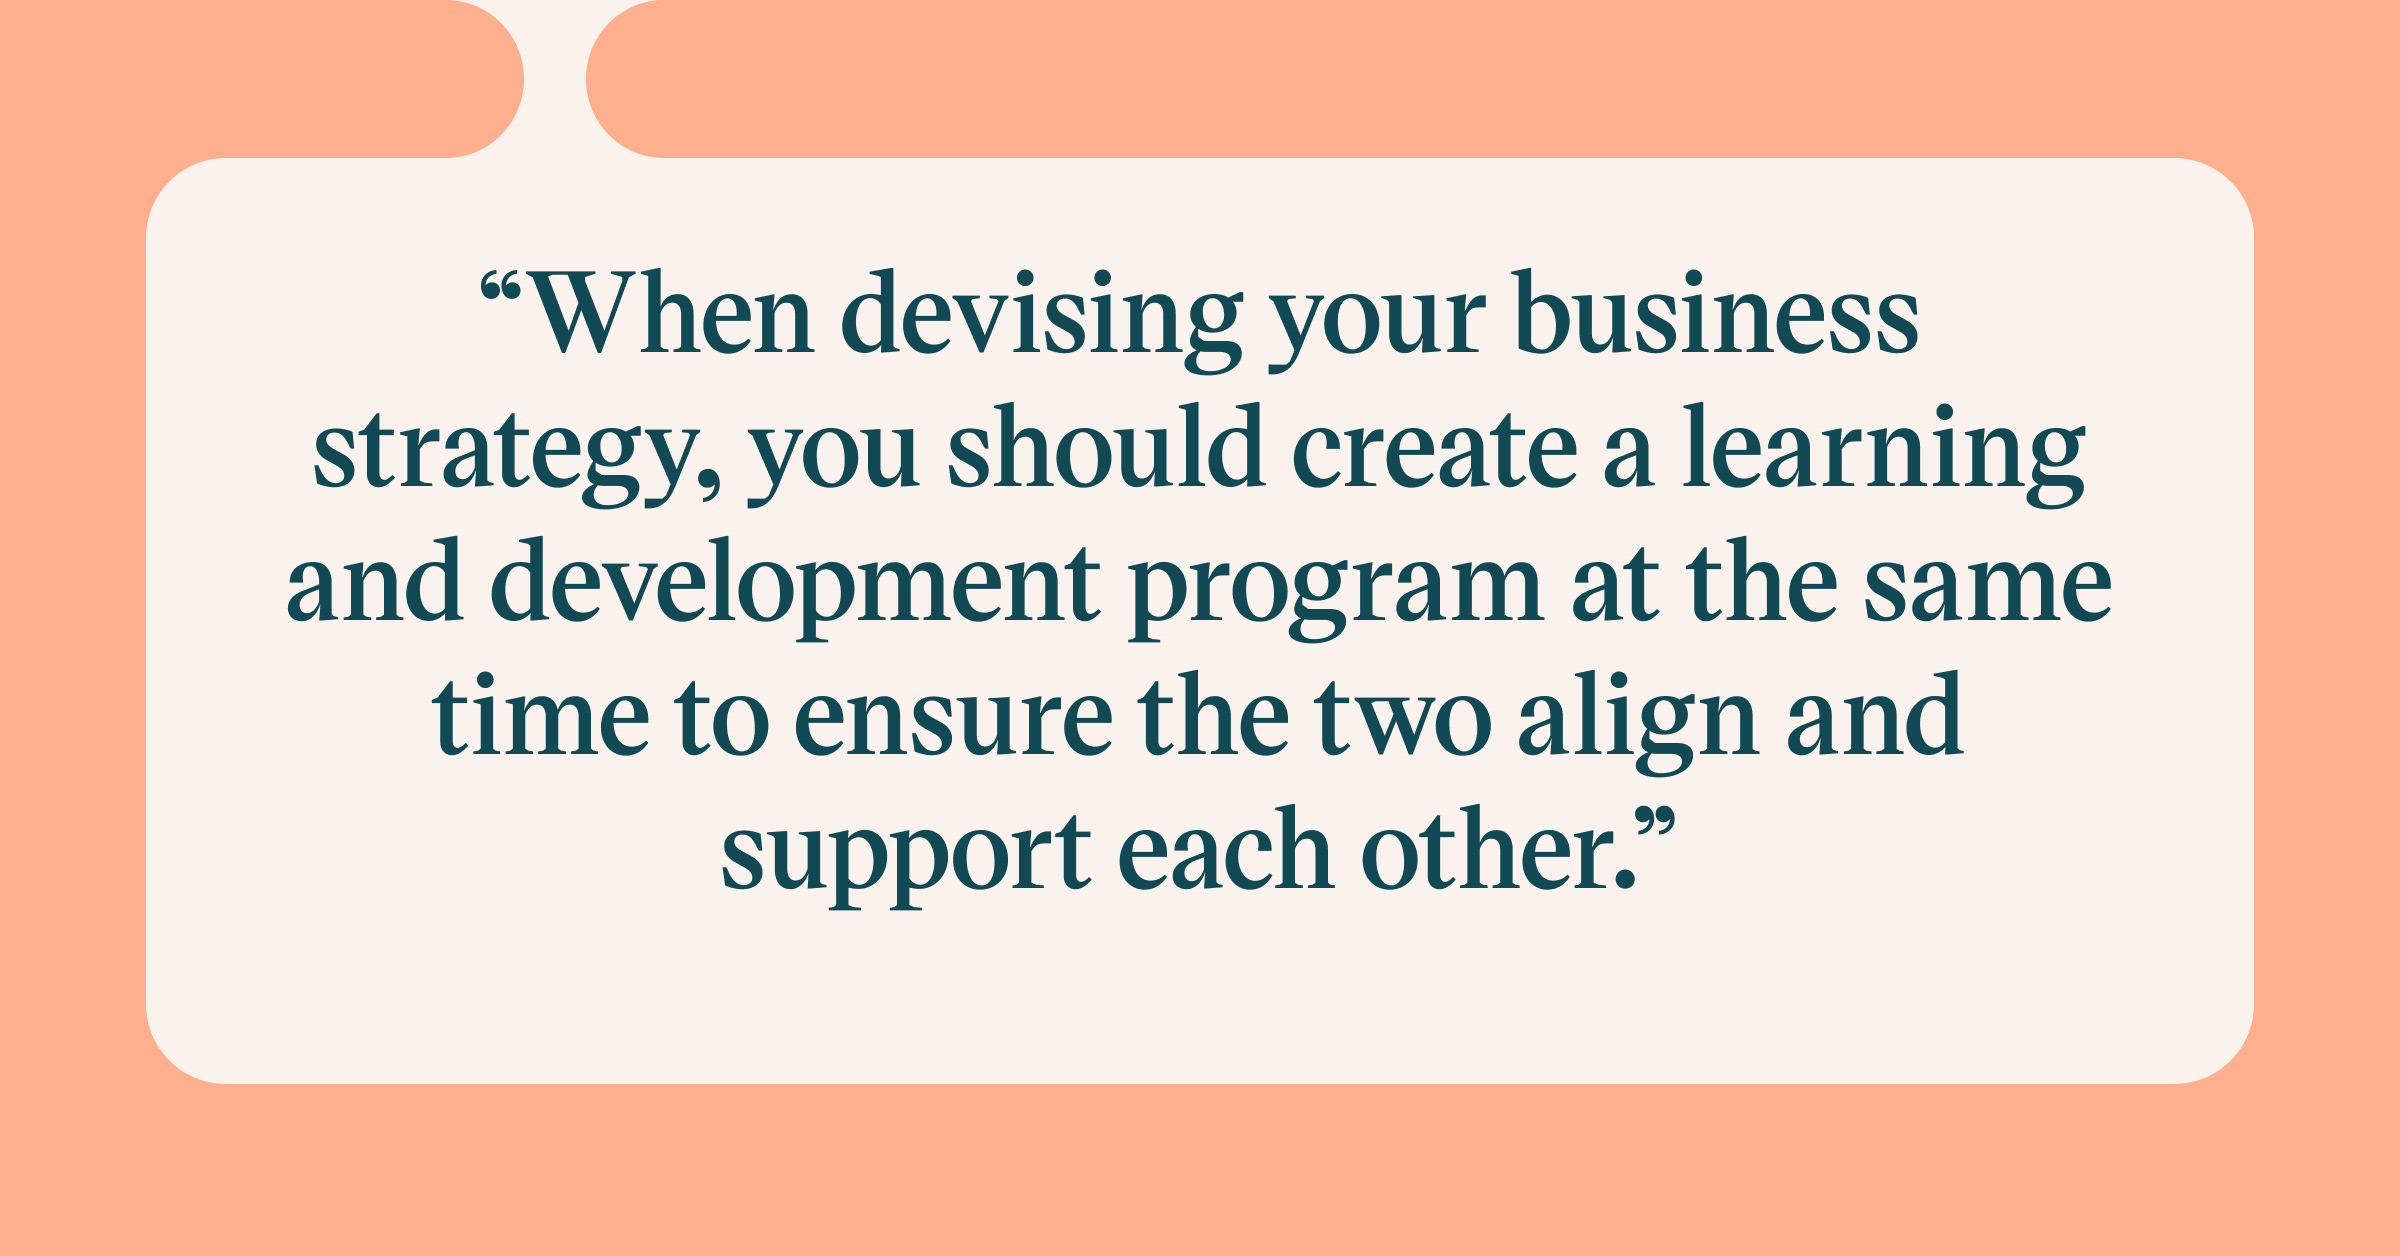 When devising your business strategy, you should create a L&D program at the same time to ensure the two align and support each other